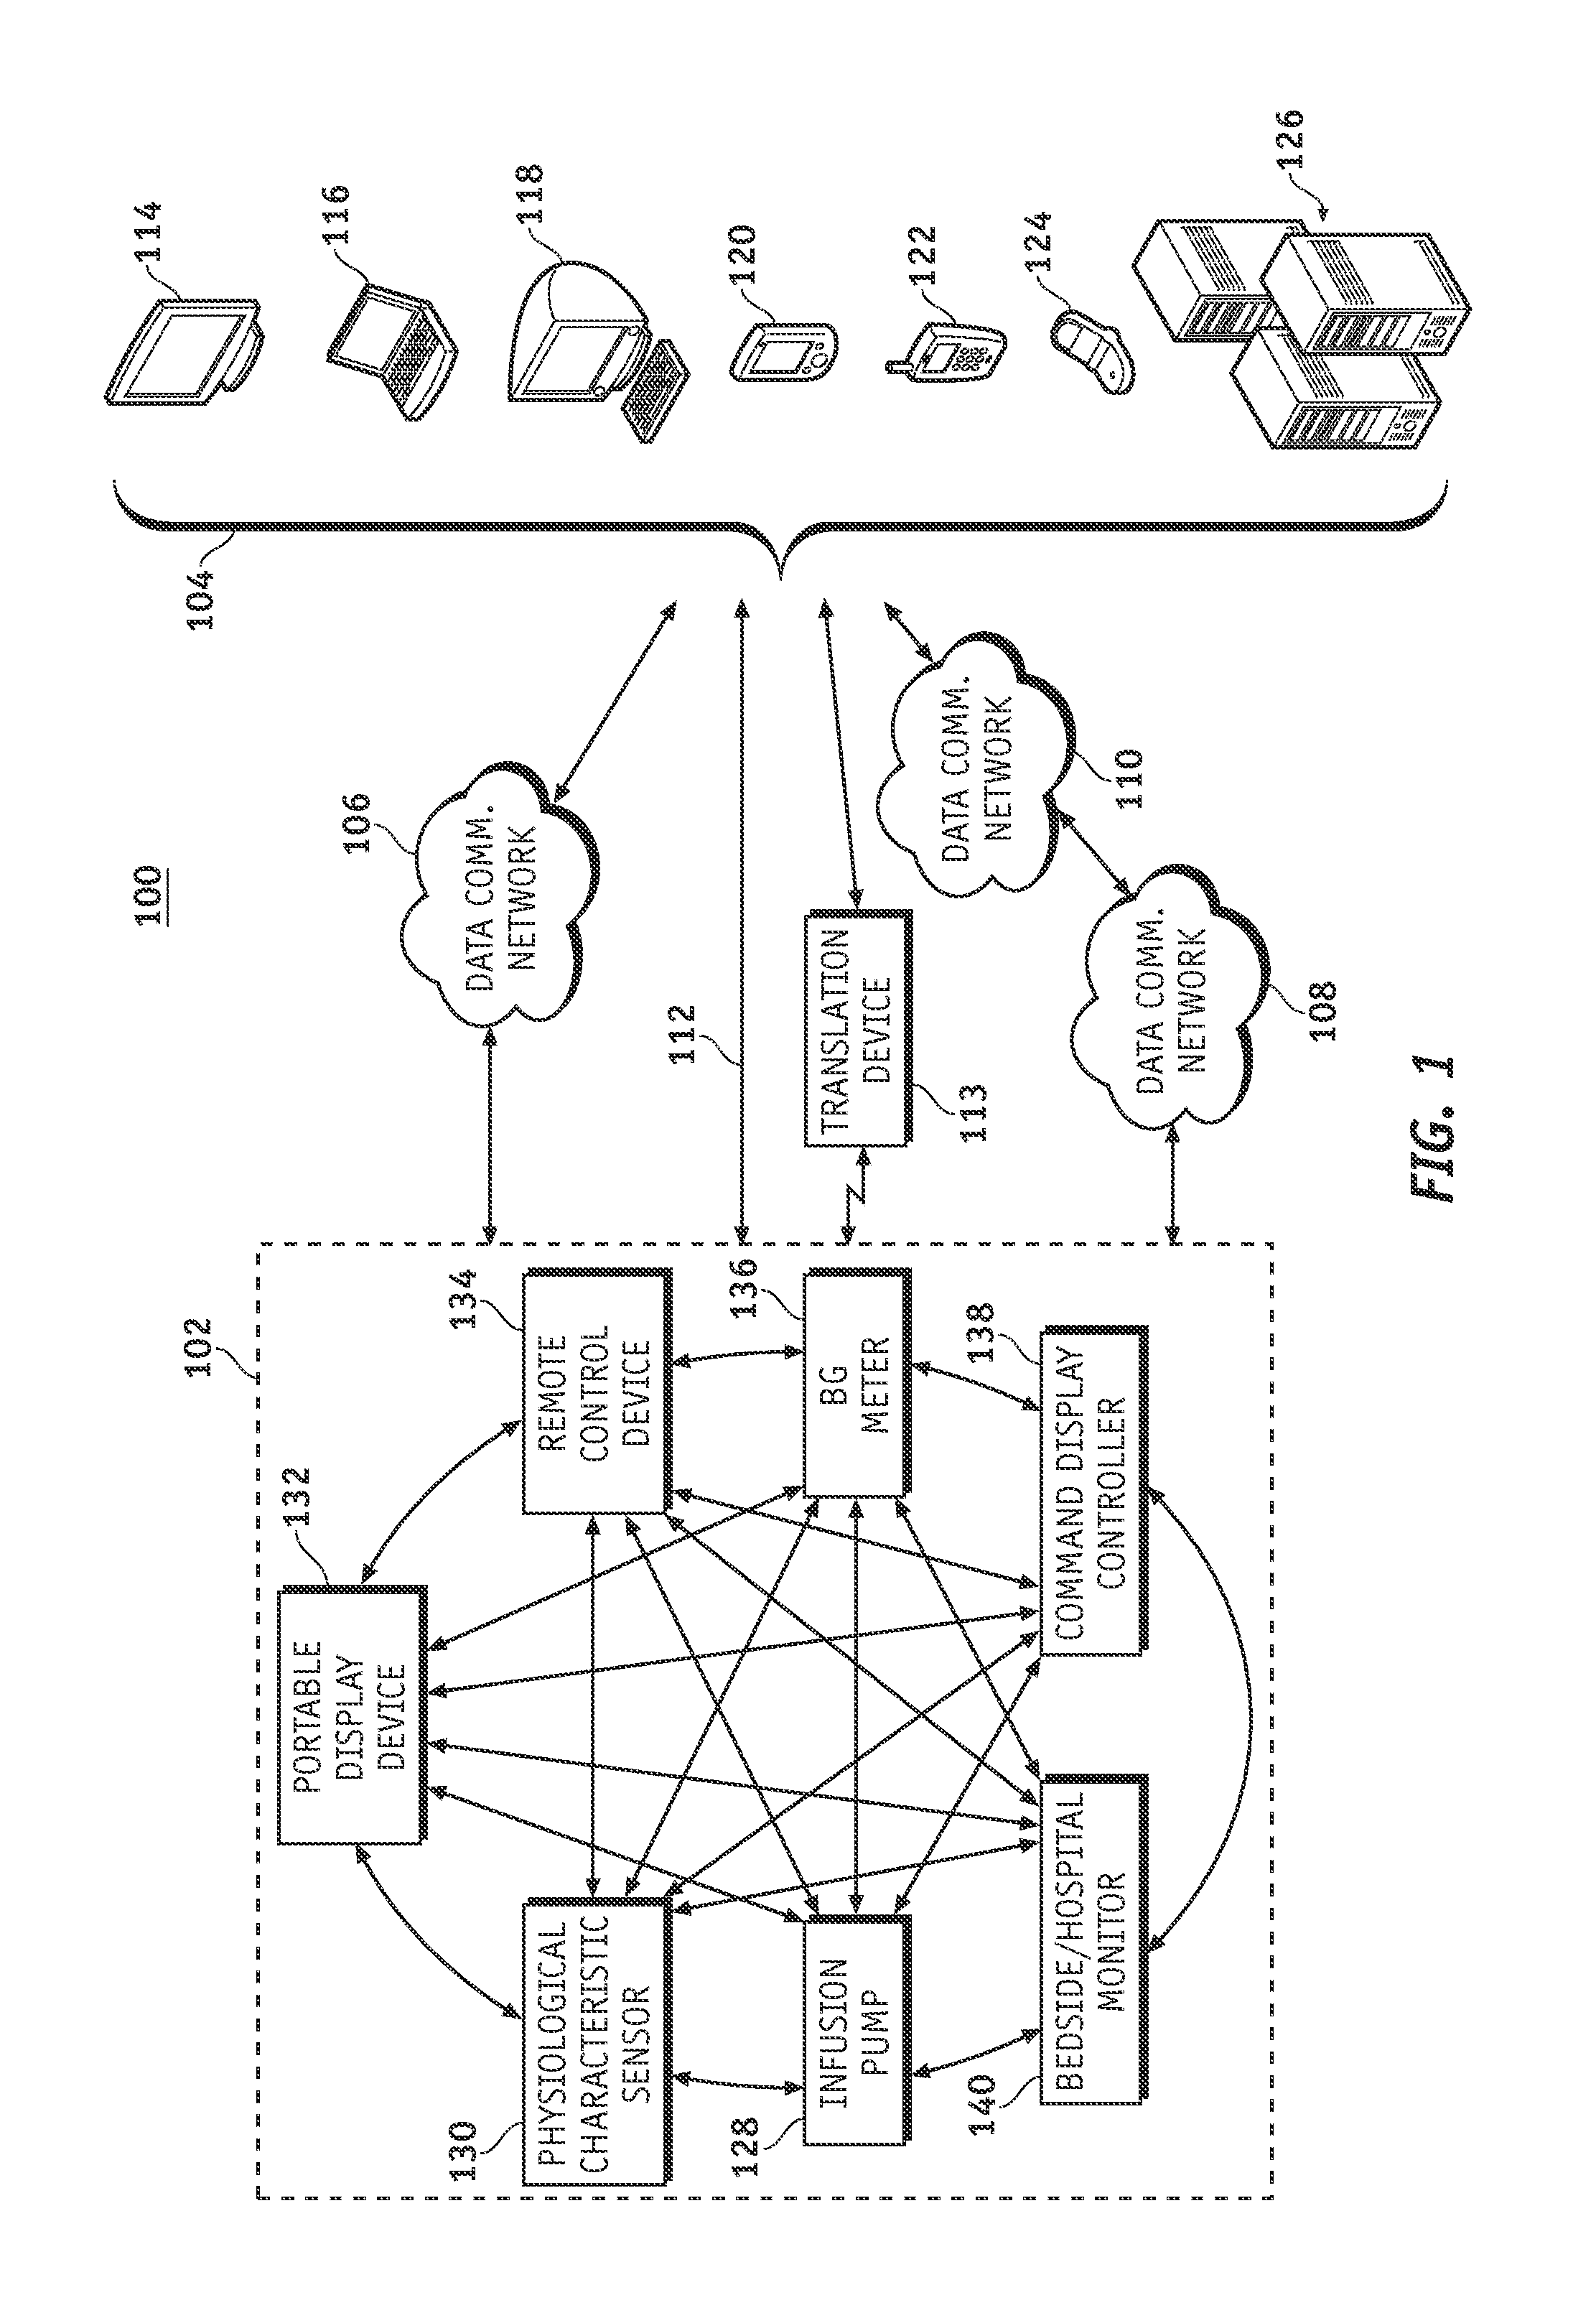 Wireless data communication protocols for a medical device network